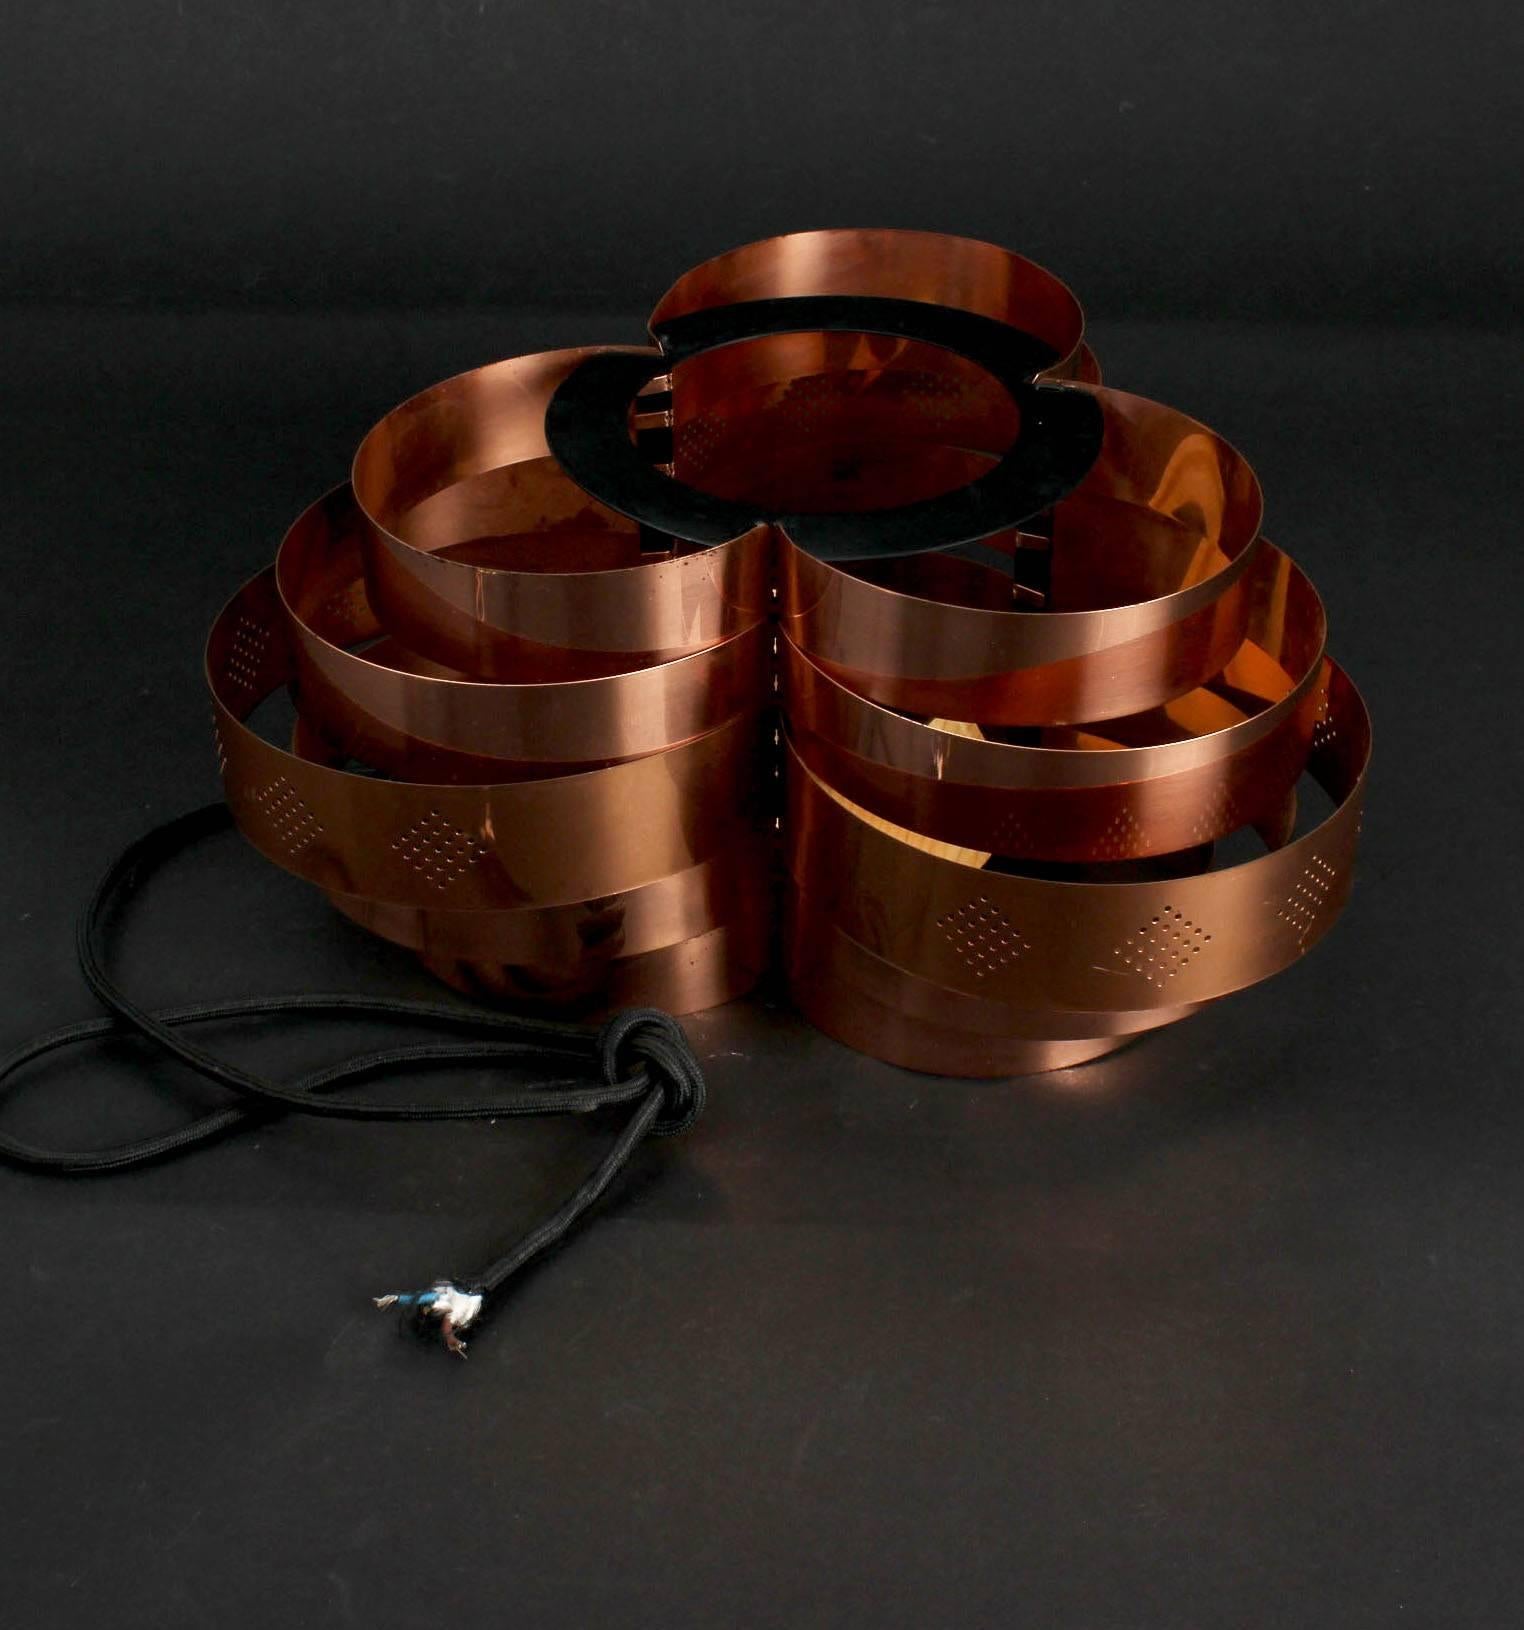 This copper lamp was designed by Werner Schou and produced by Coronell Electro in the 1960s. Schou was a Danish lamp designer. The pendant lamp consists of five graded tiers of semicircular copper bands; the central strip features perforated